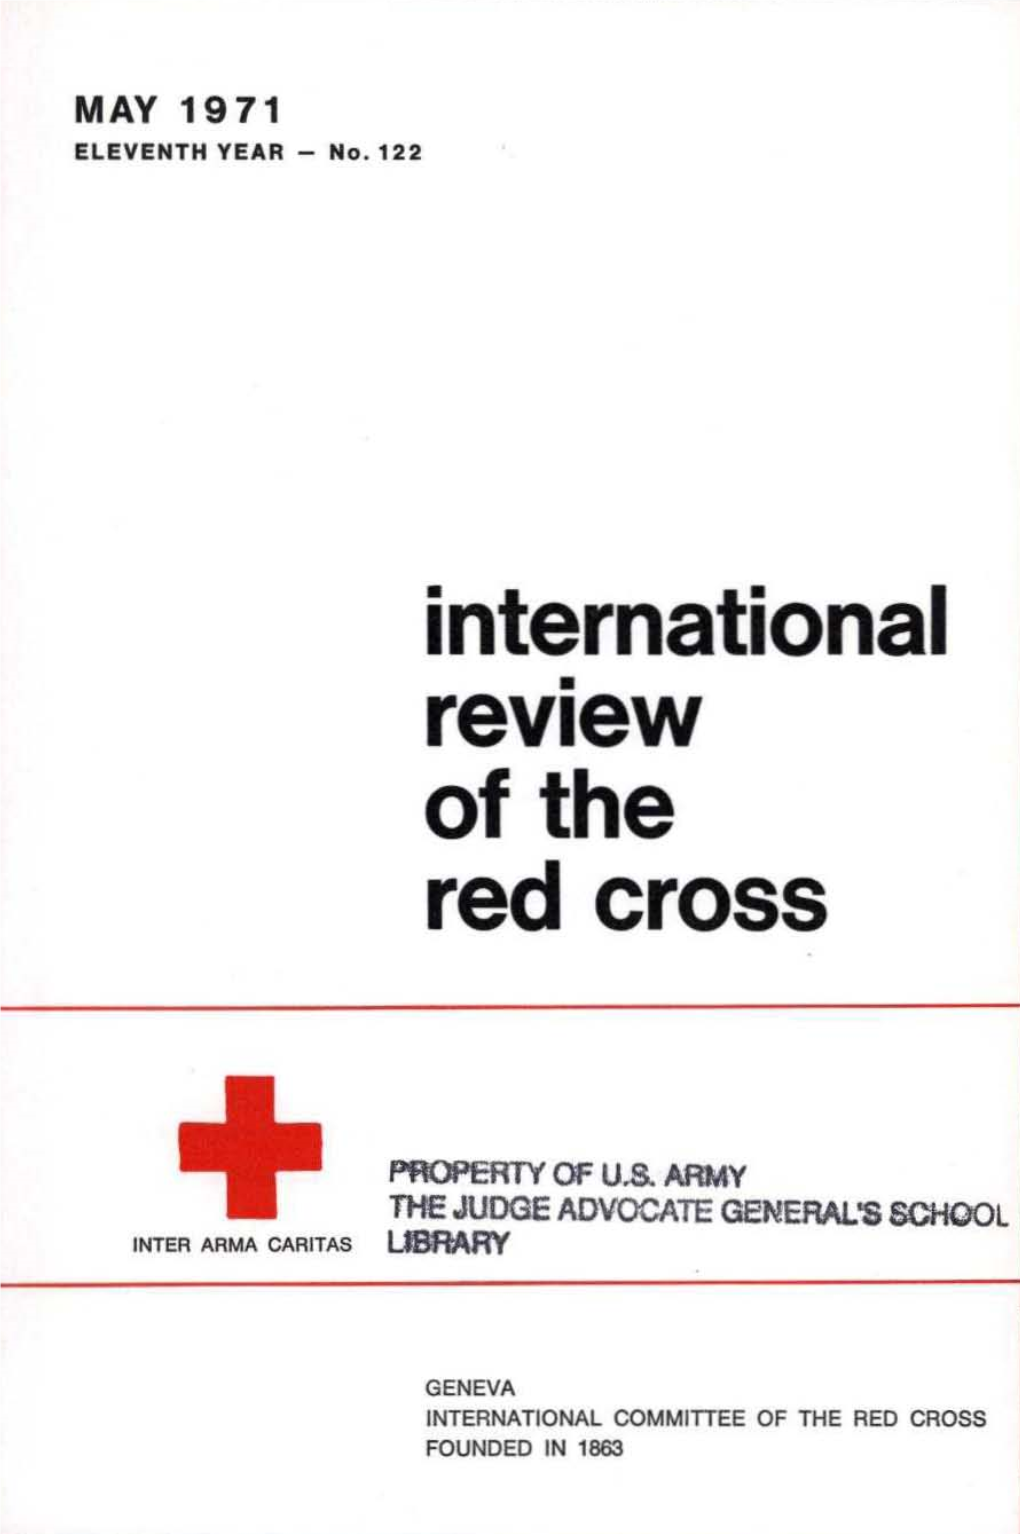 International Review of the Red Cross, May 1971, Eleventh Year